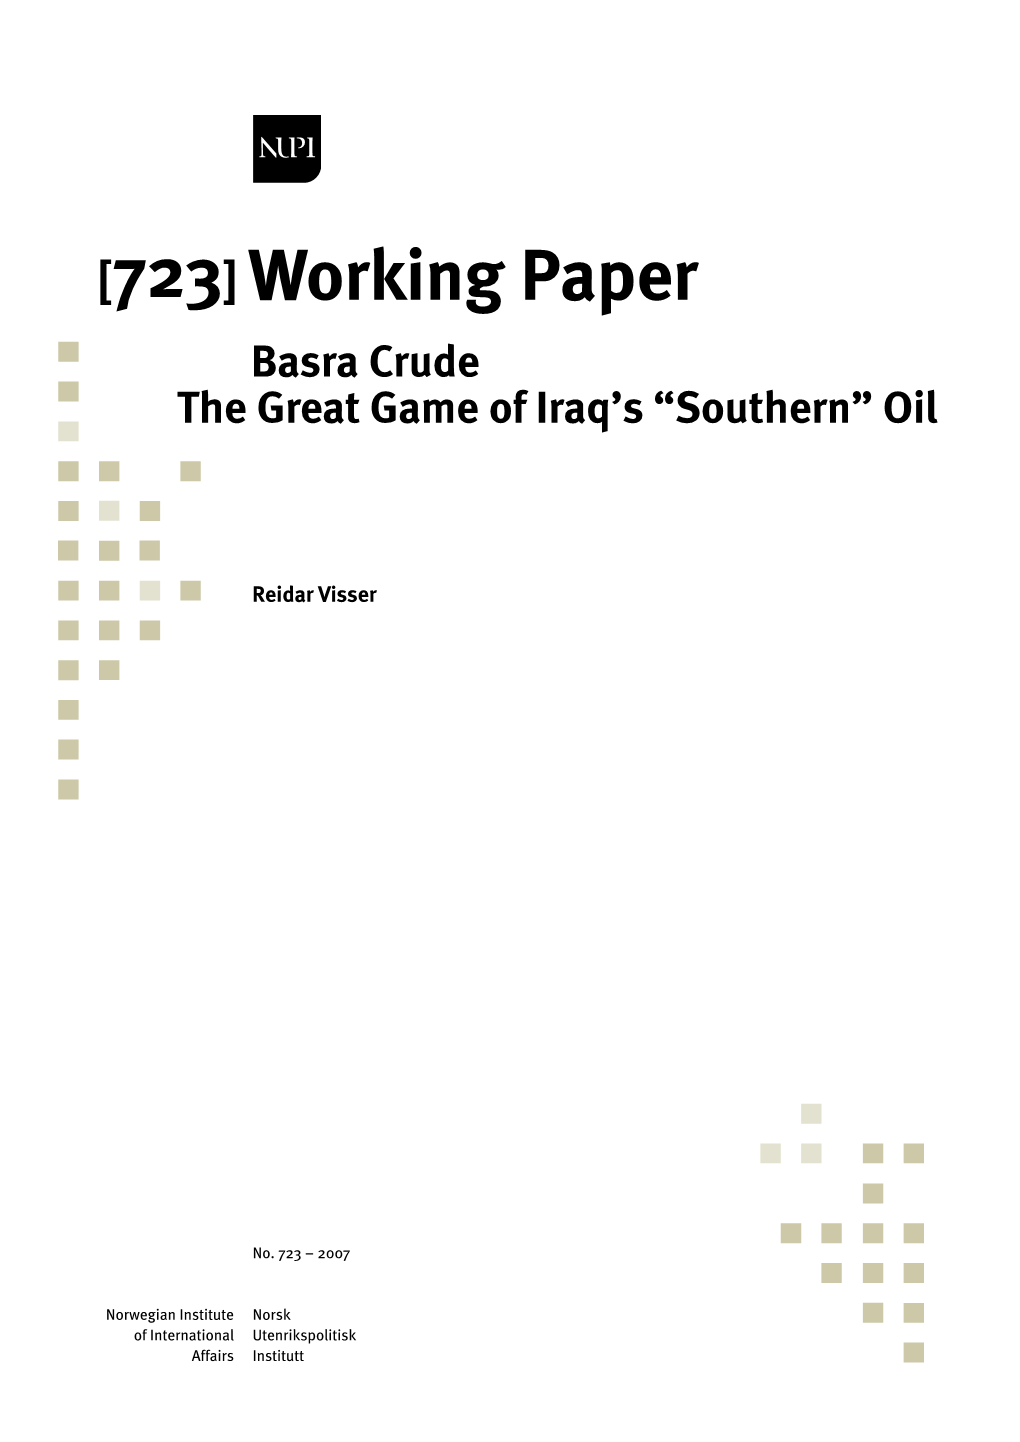 Basra Crude: the Great Game of Iraq's "Southern"